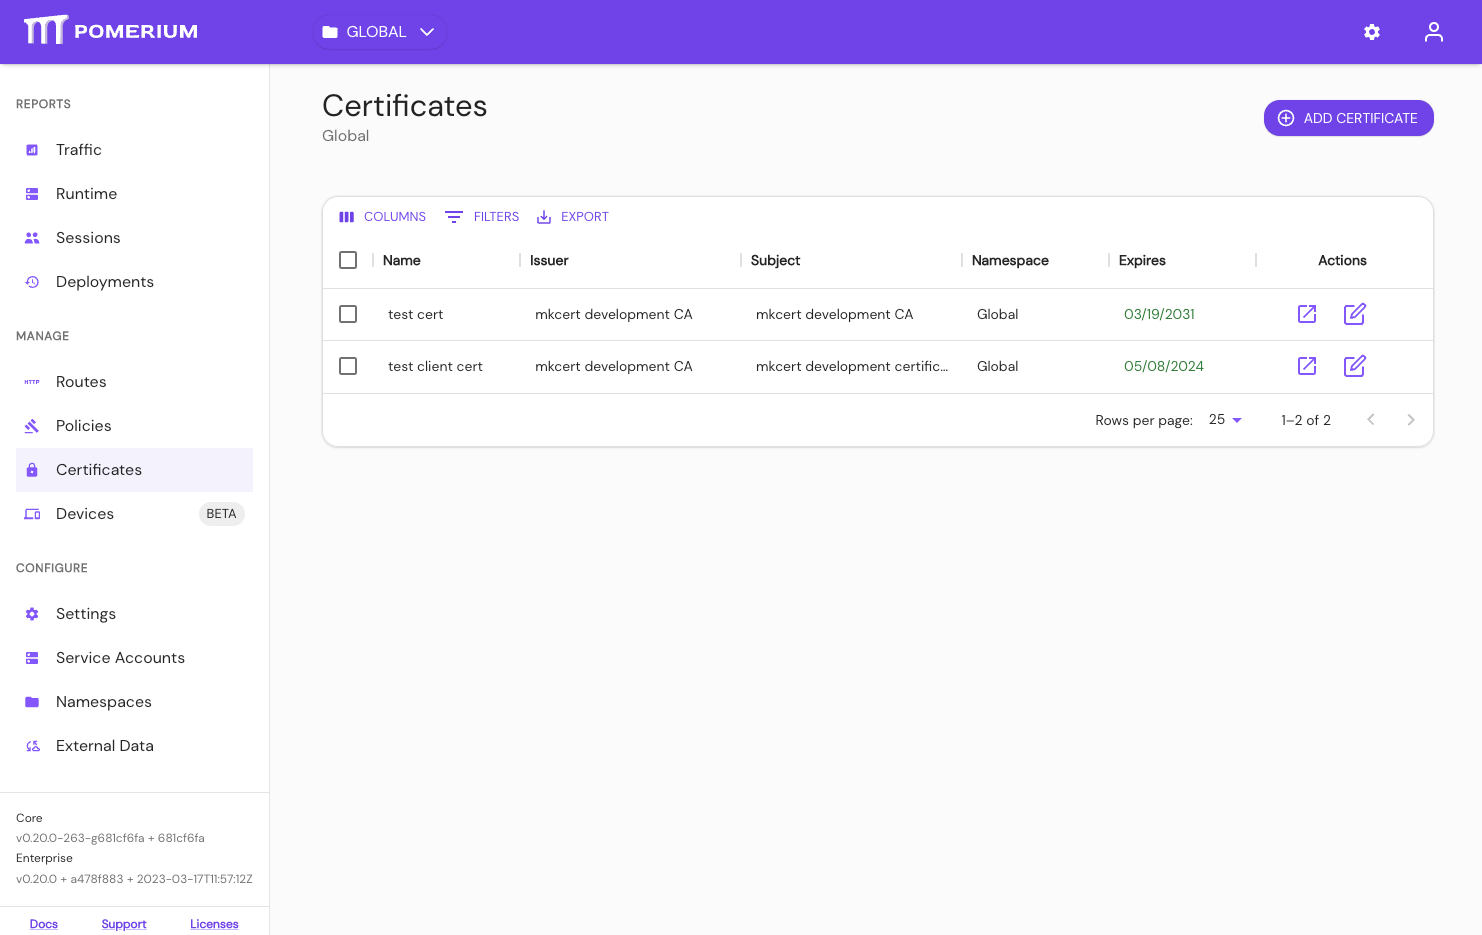 See your Certificates in the Enterprise Console